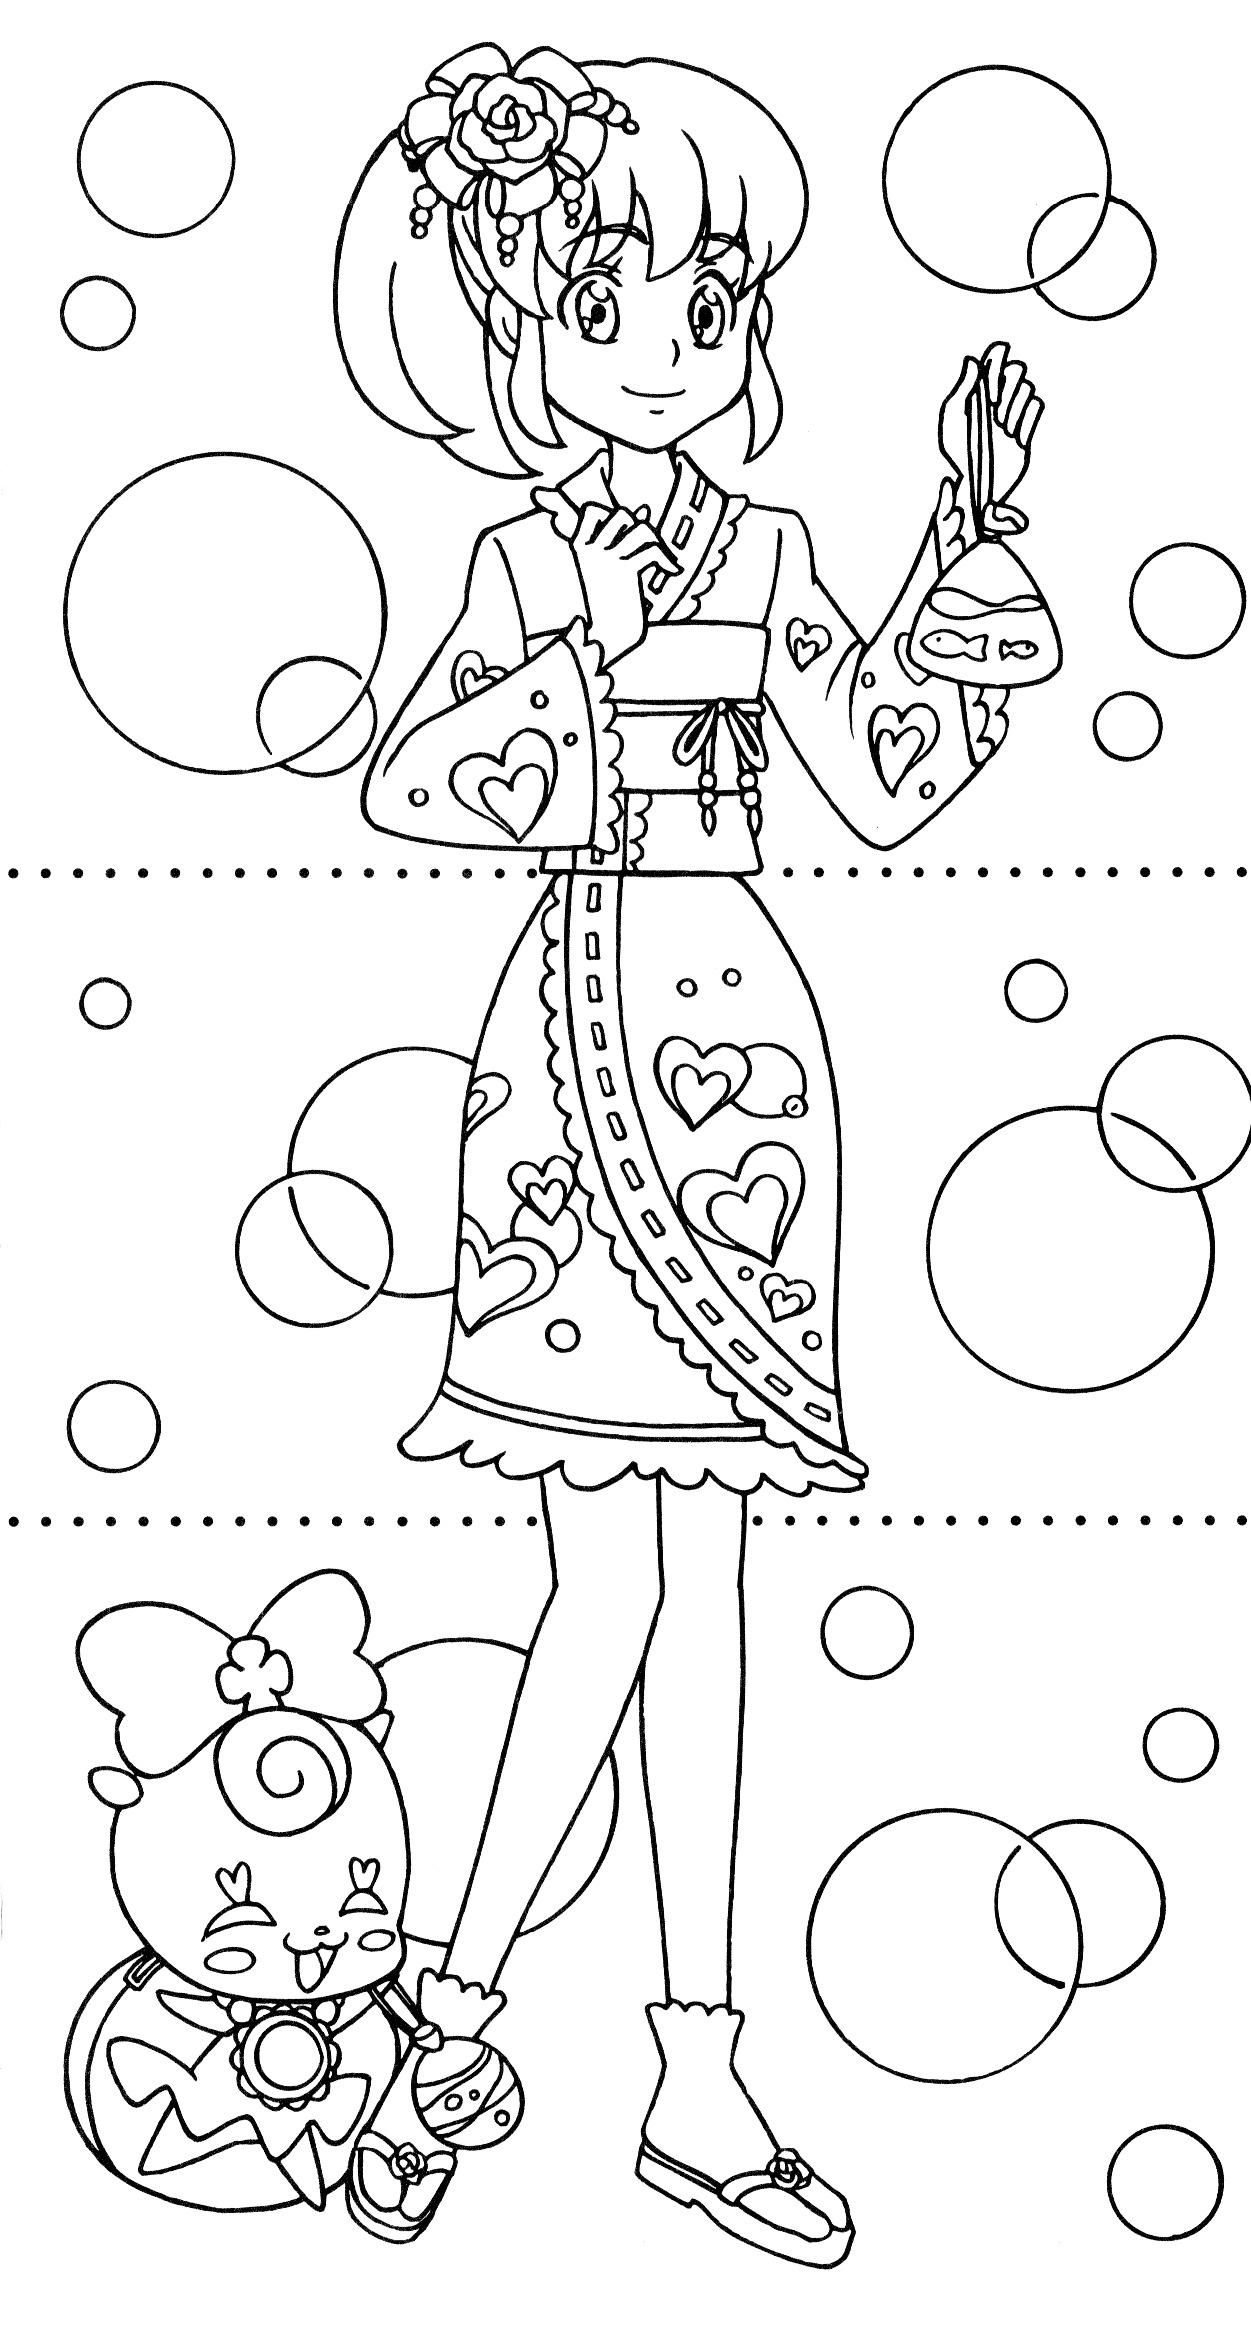 Happiness Charge Precure Dressup Coloring Book 5